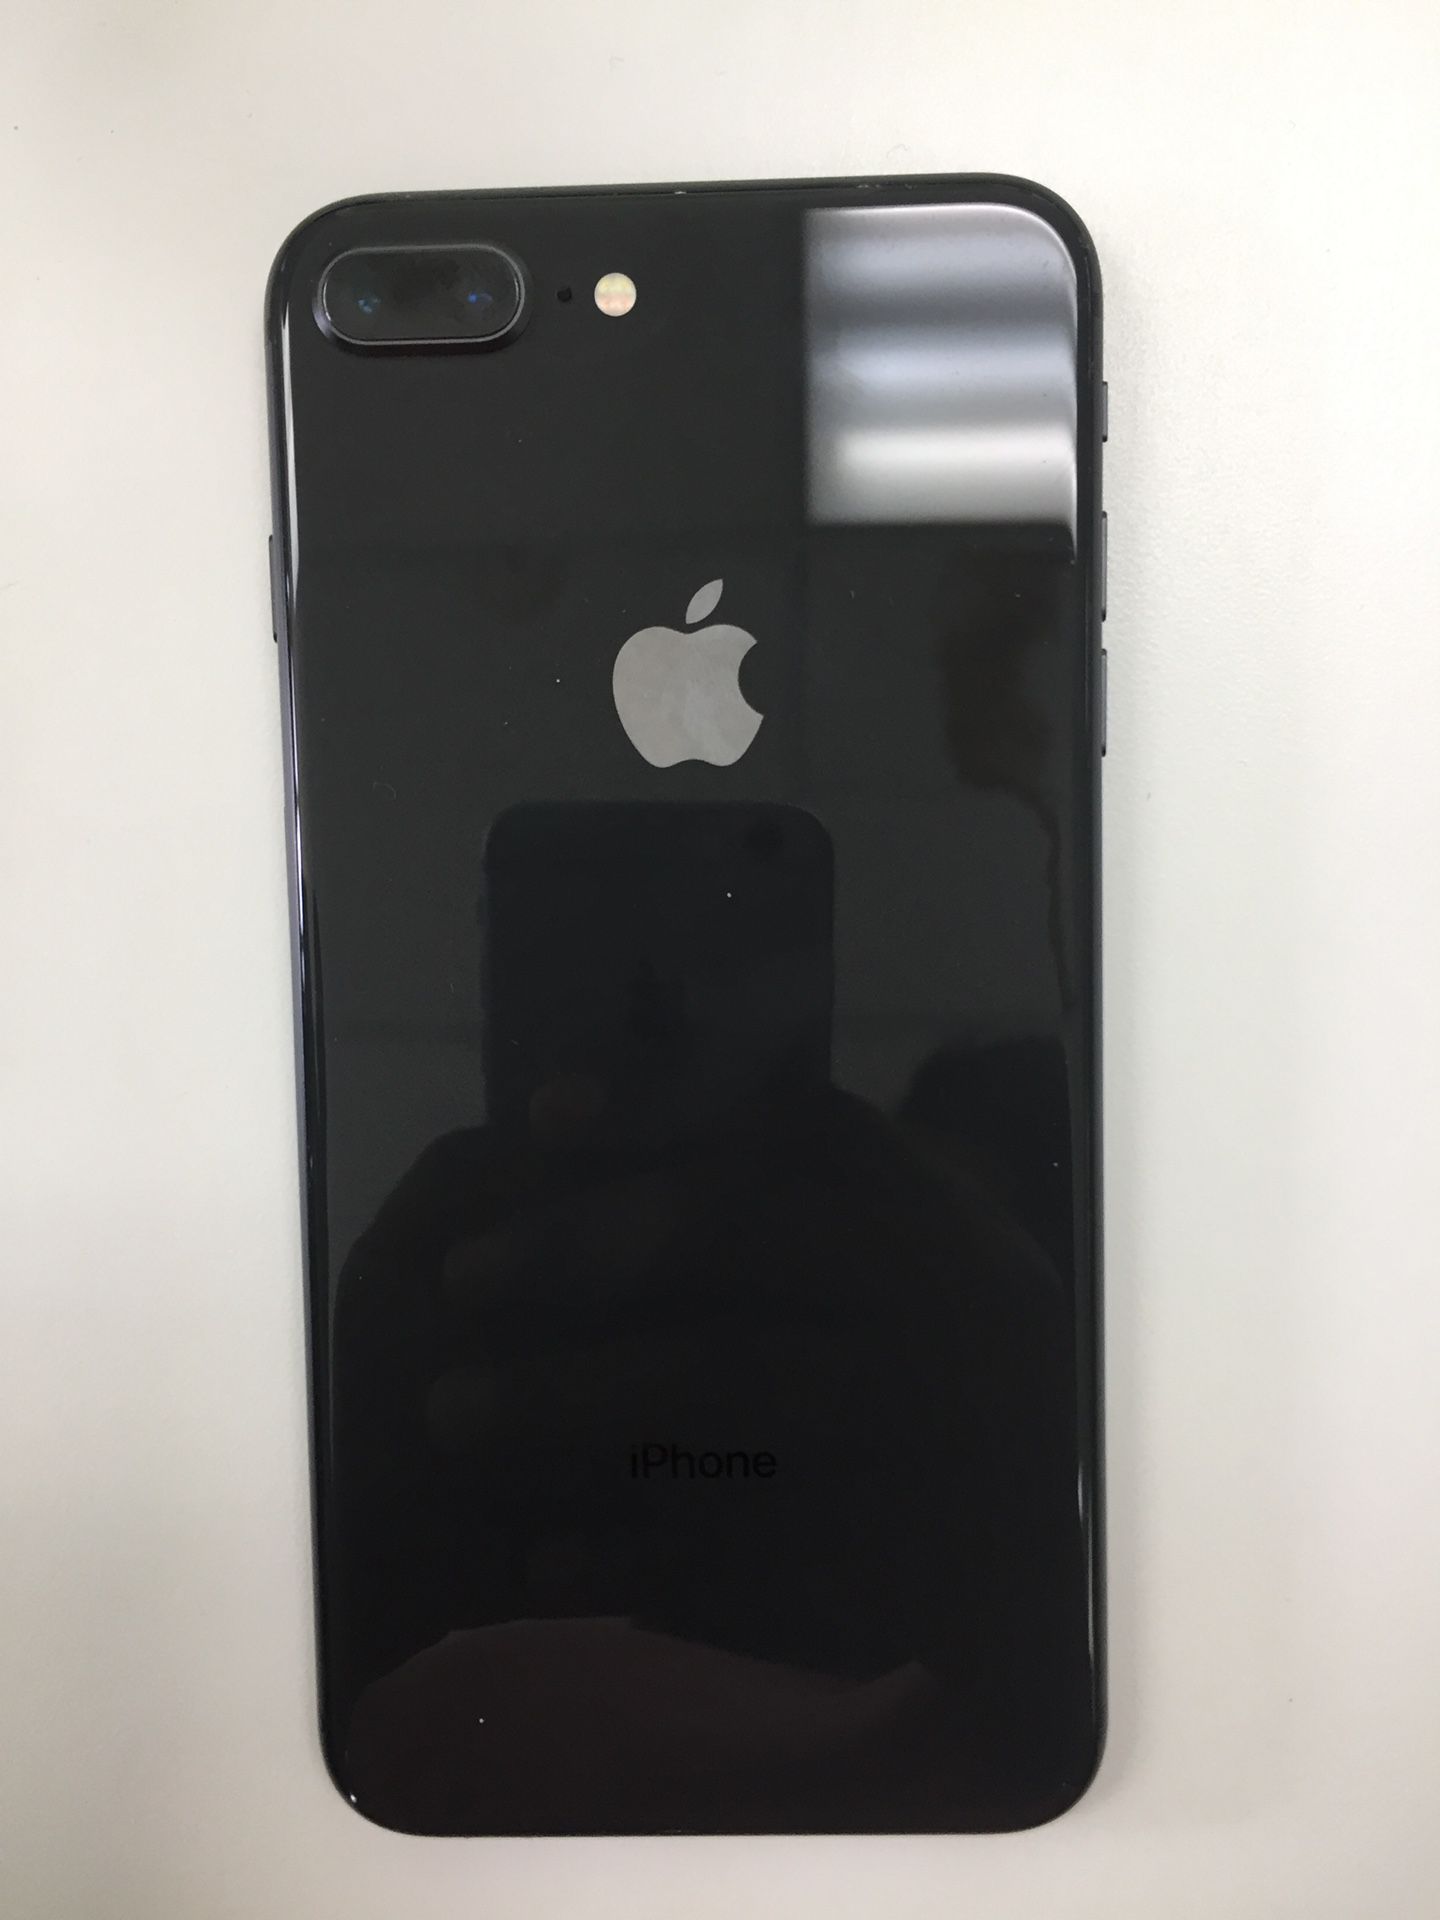 brand new iphone 8plus. no cracks. with at&t 64Gb